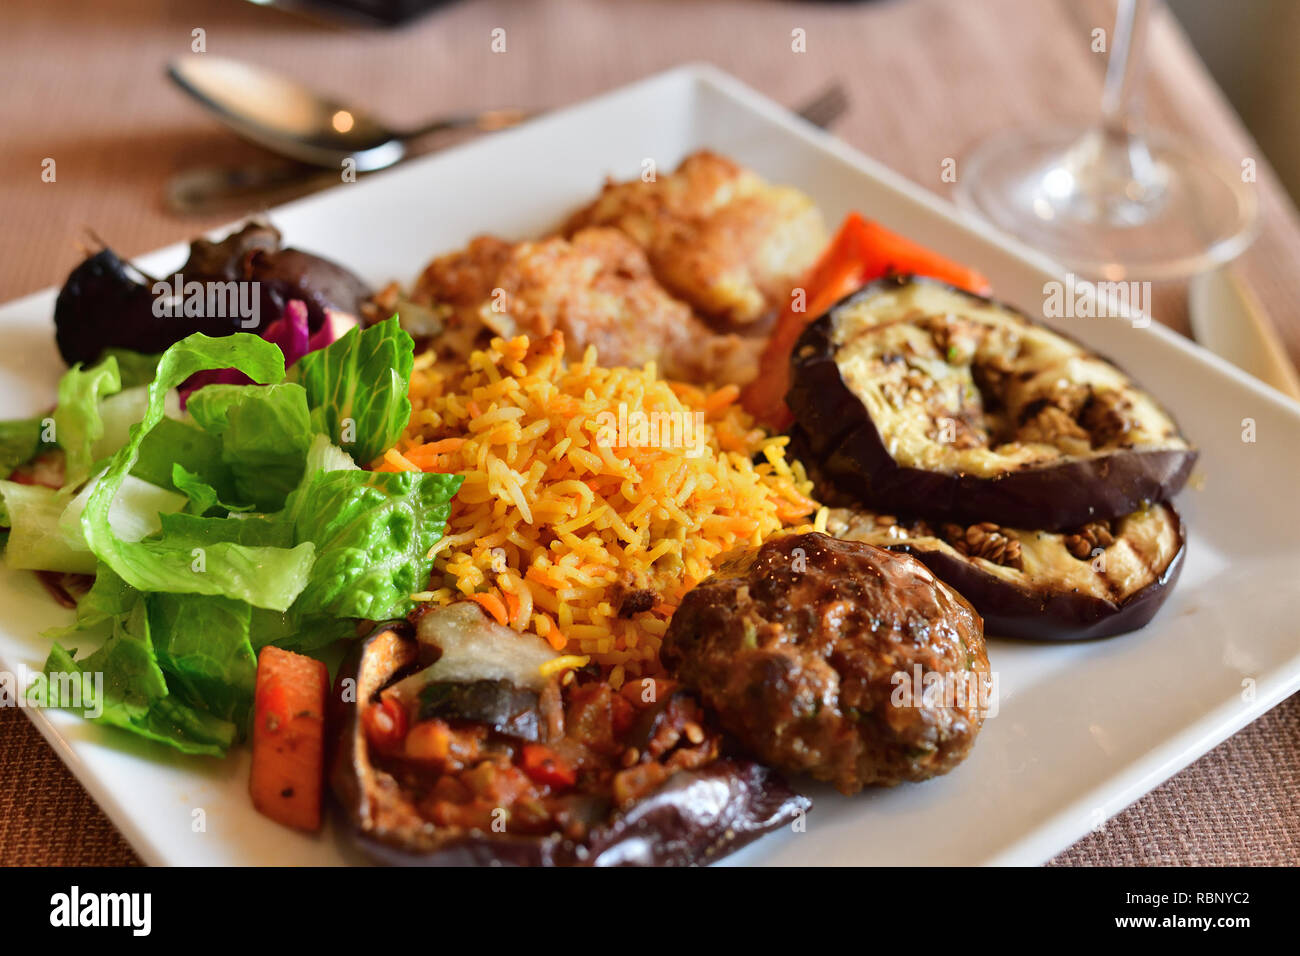 Rice and grilled vegetables and fish on a plate in cafe Stock Photo